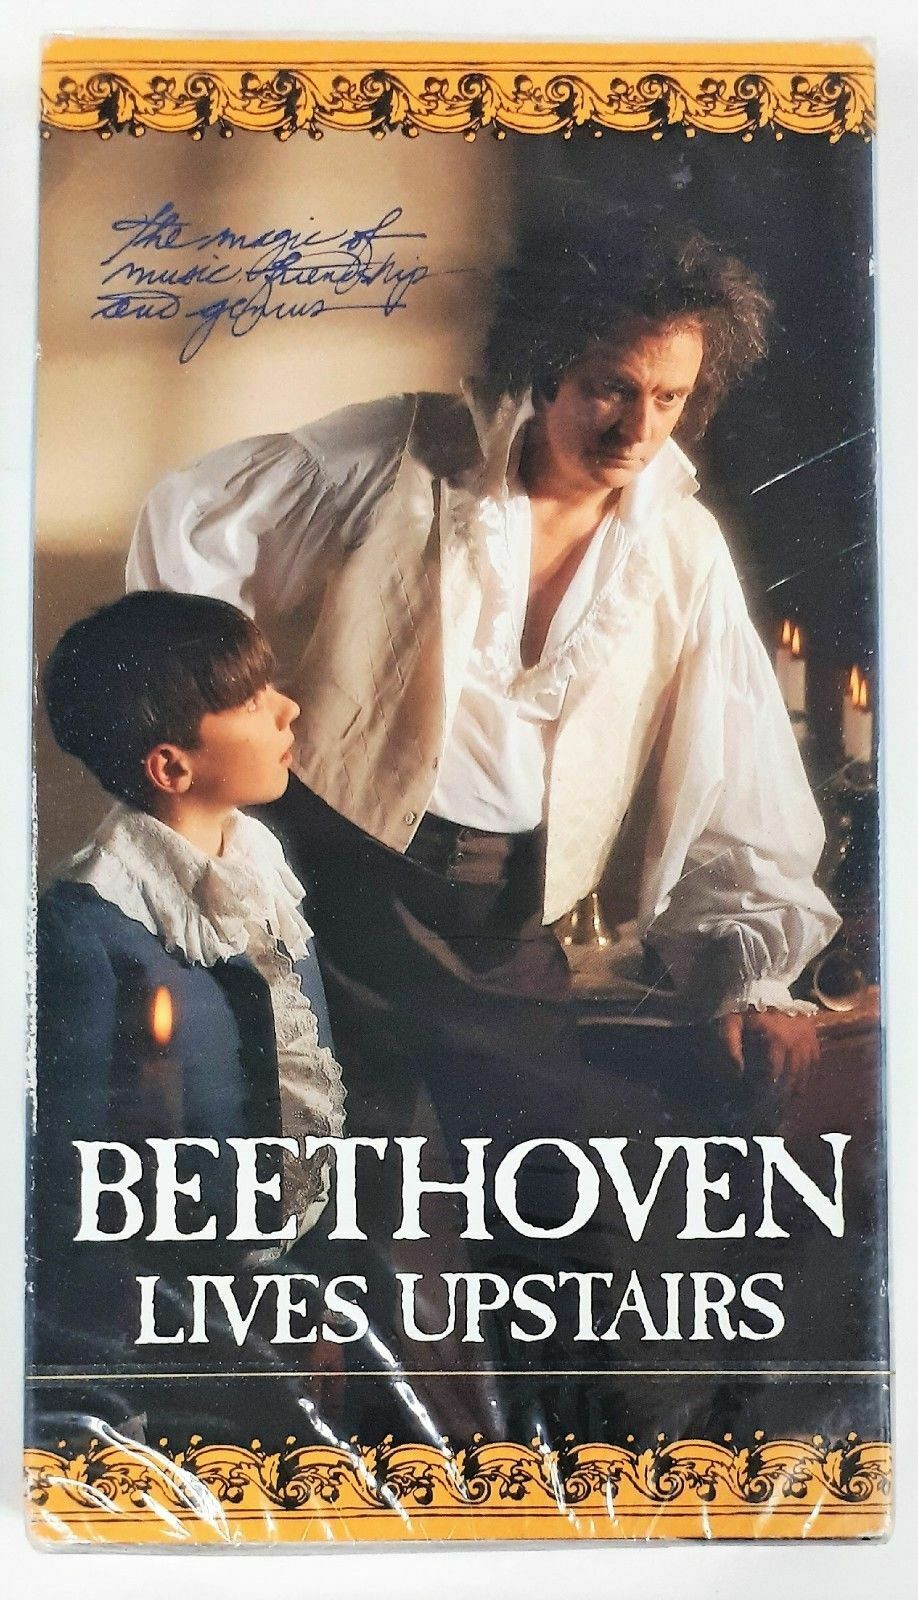 You are currently viewing Beethoven lives upstairs